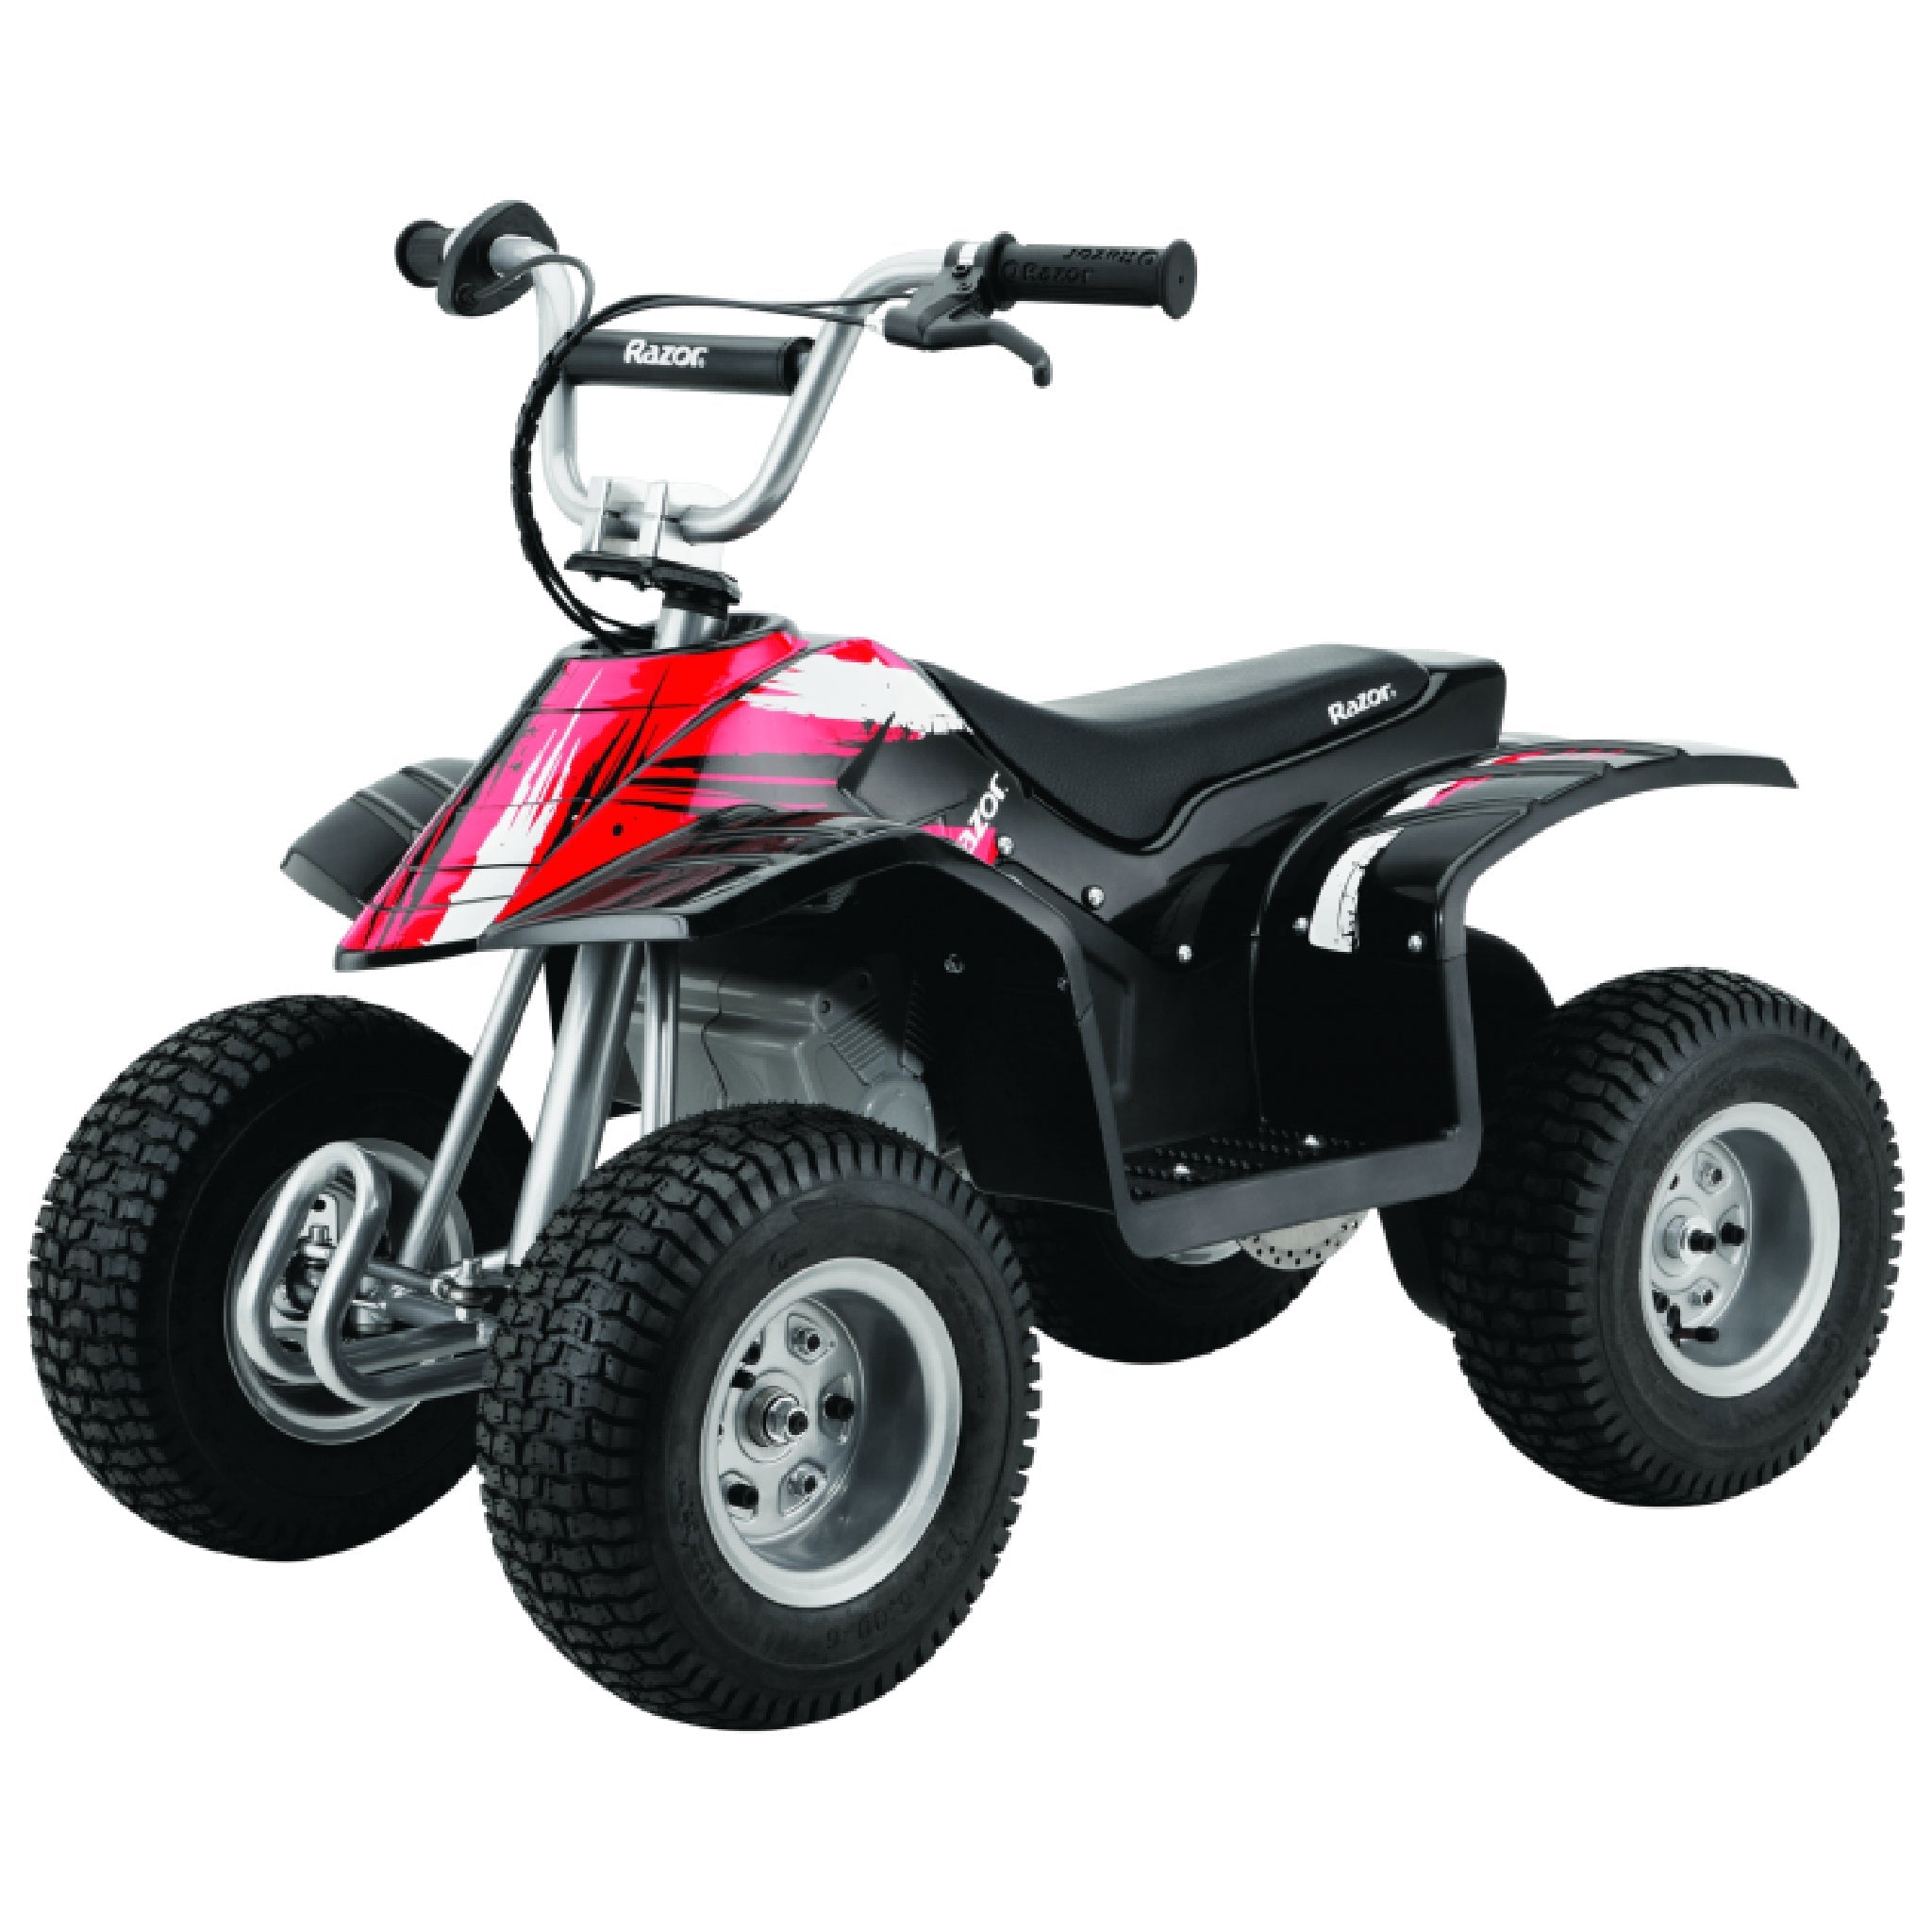 Razor Dirt Quad black for ages 8 and up